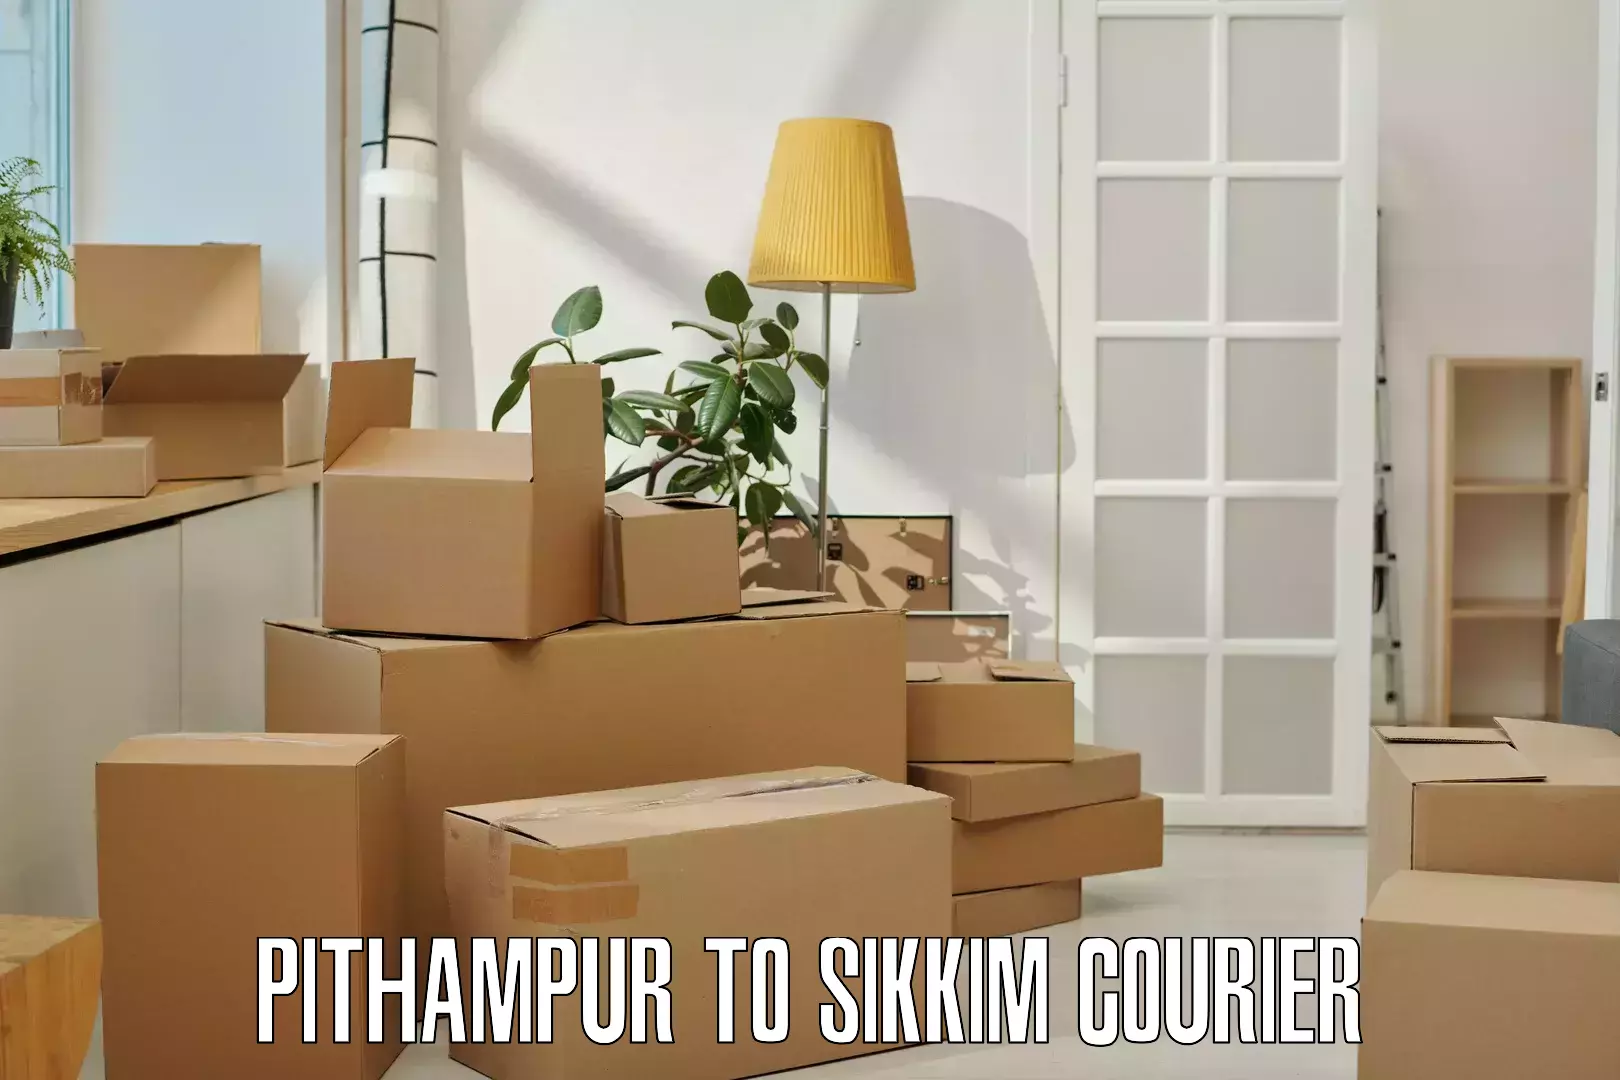 Express delivery network Pithampur to Sikkim